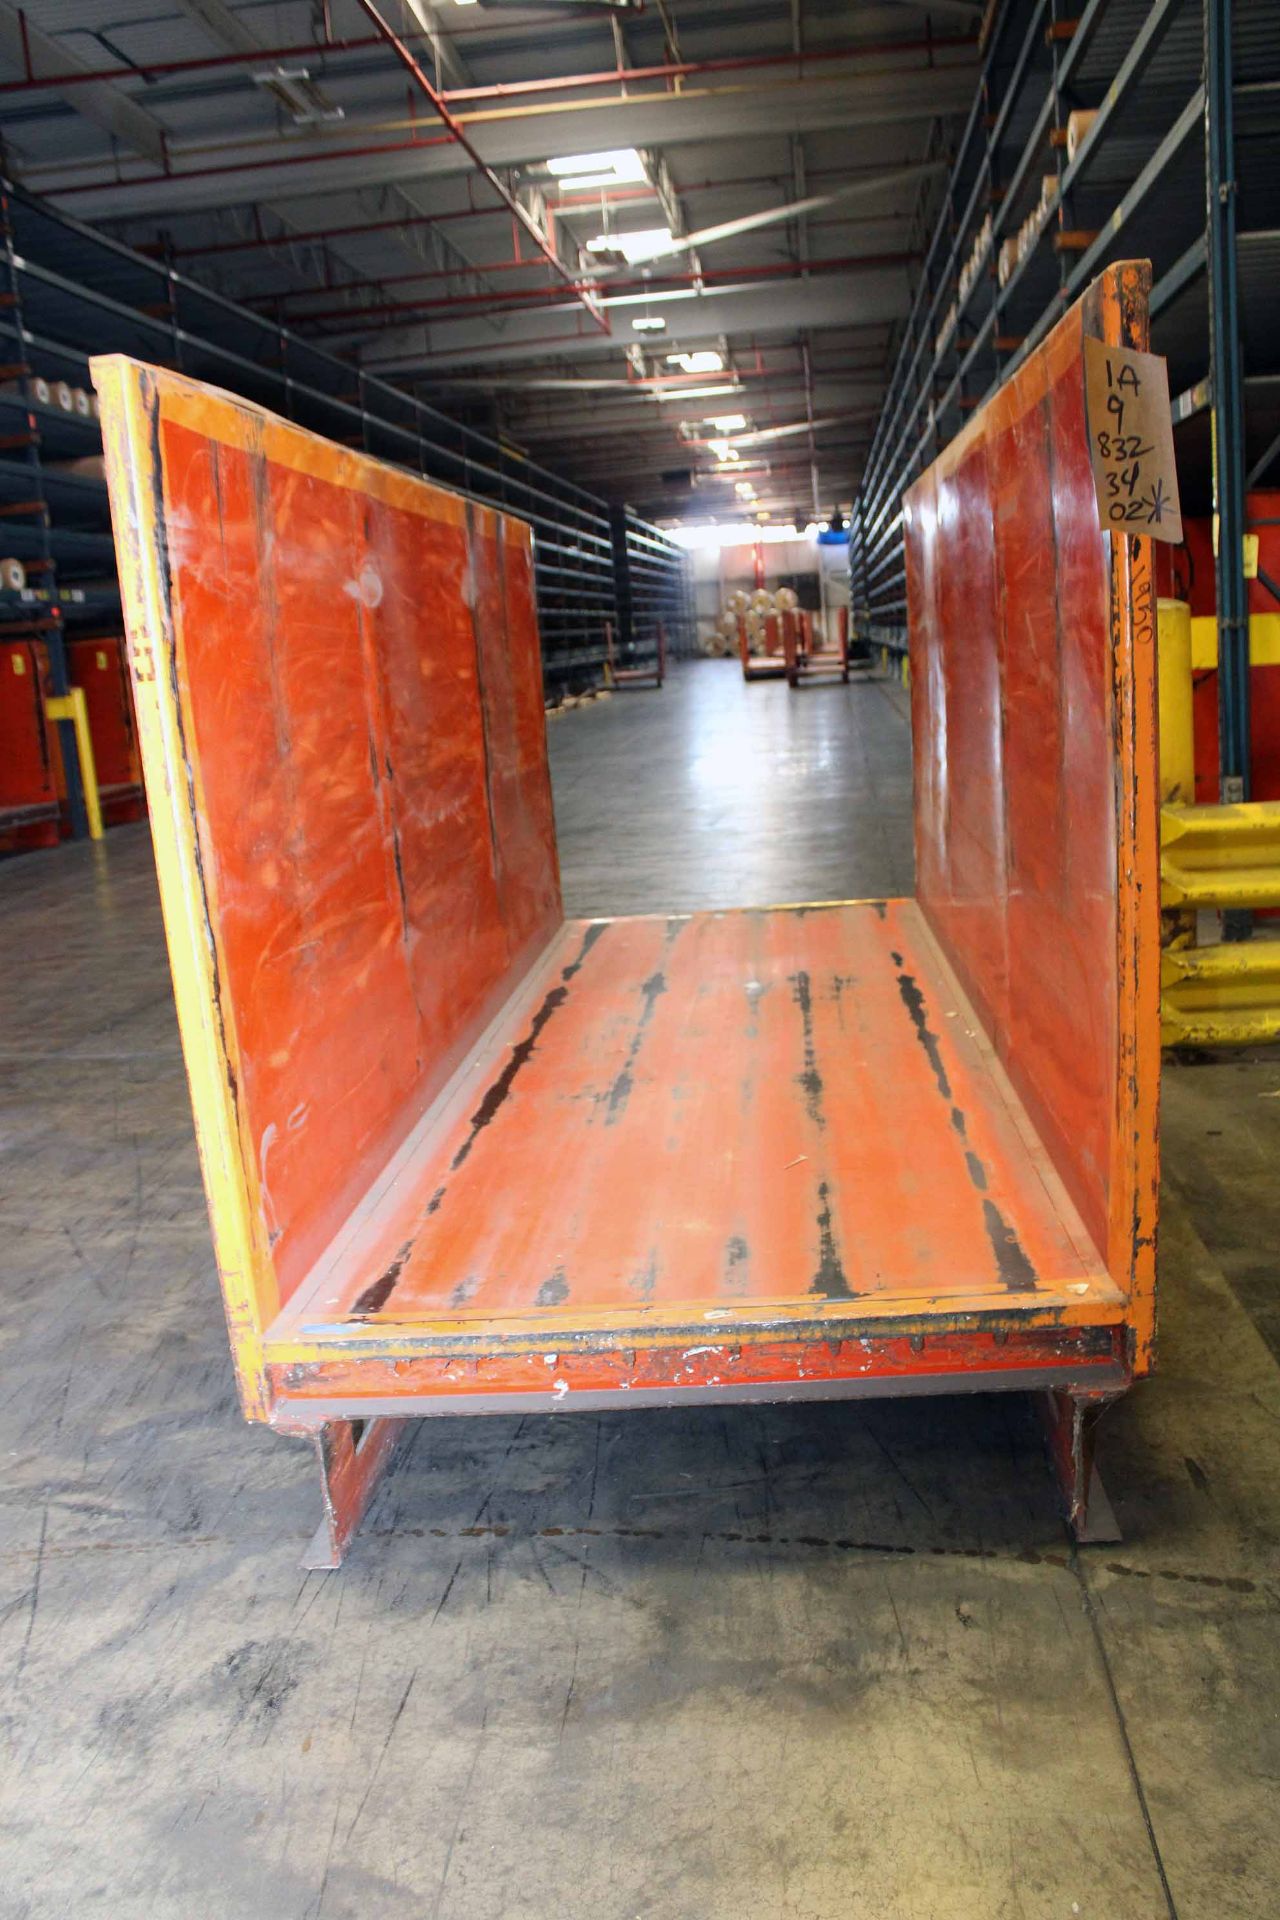 LOT OF MATERIAL TRANSPORT SKIDS (10), steel construction, approx. 5'W. x 12'L. x 6.5'ht. - Image 2 of 2